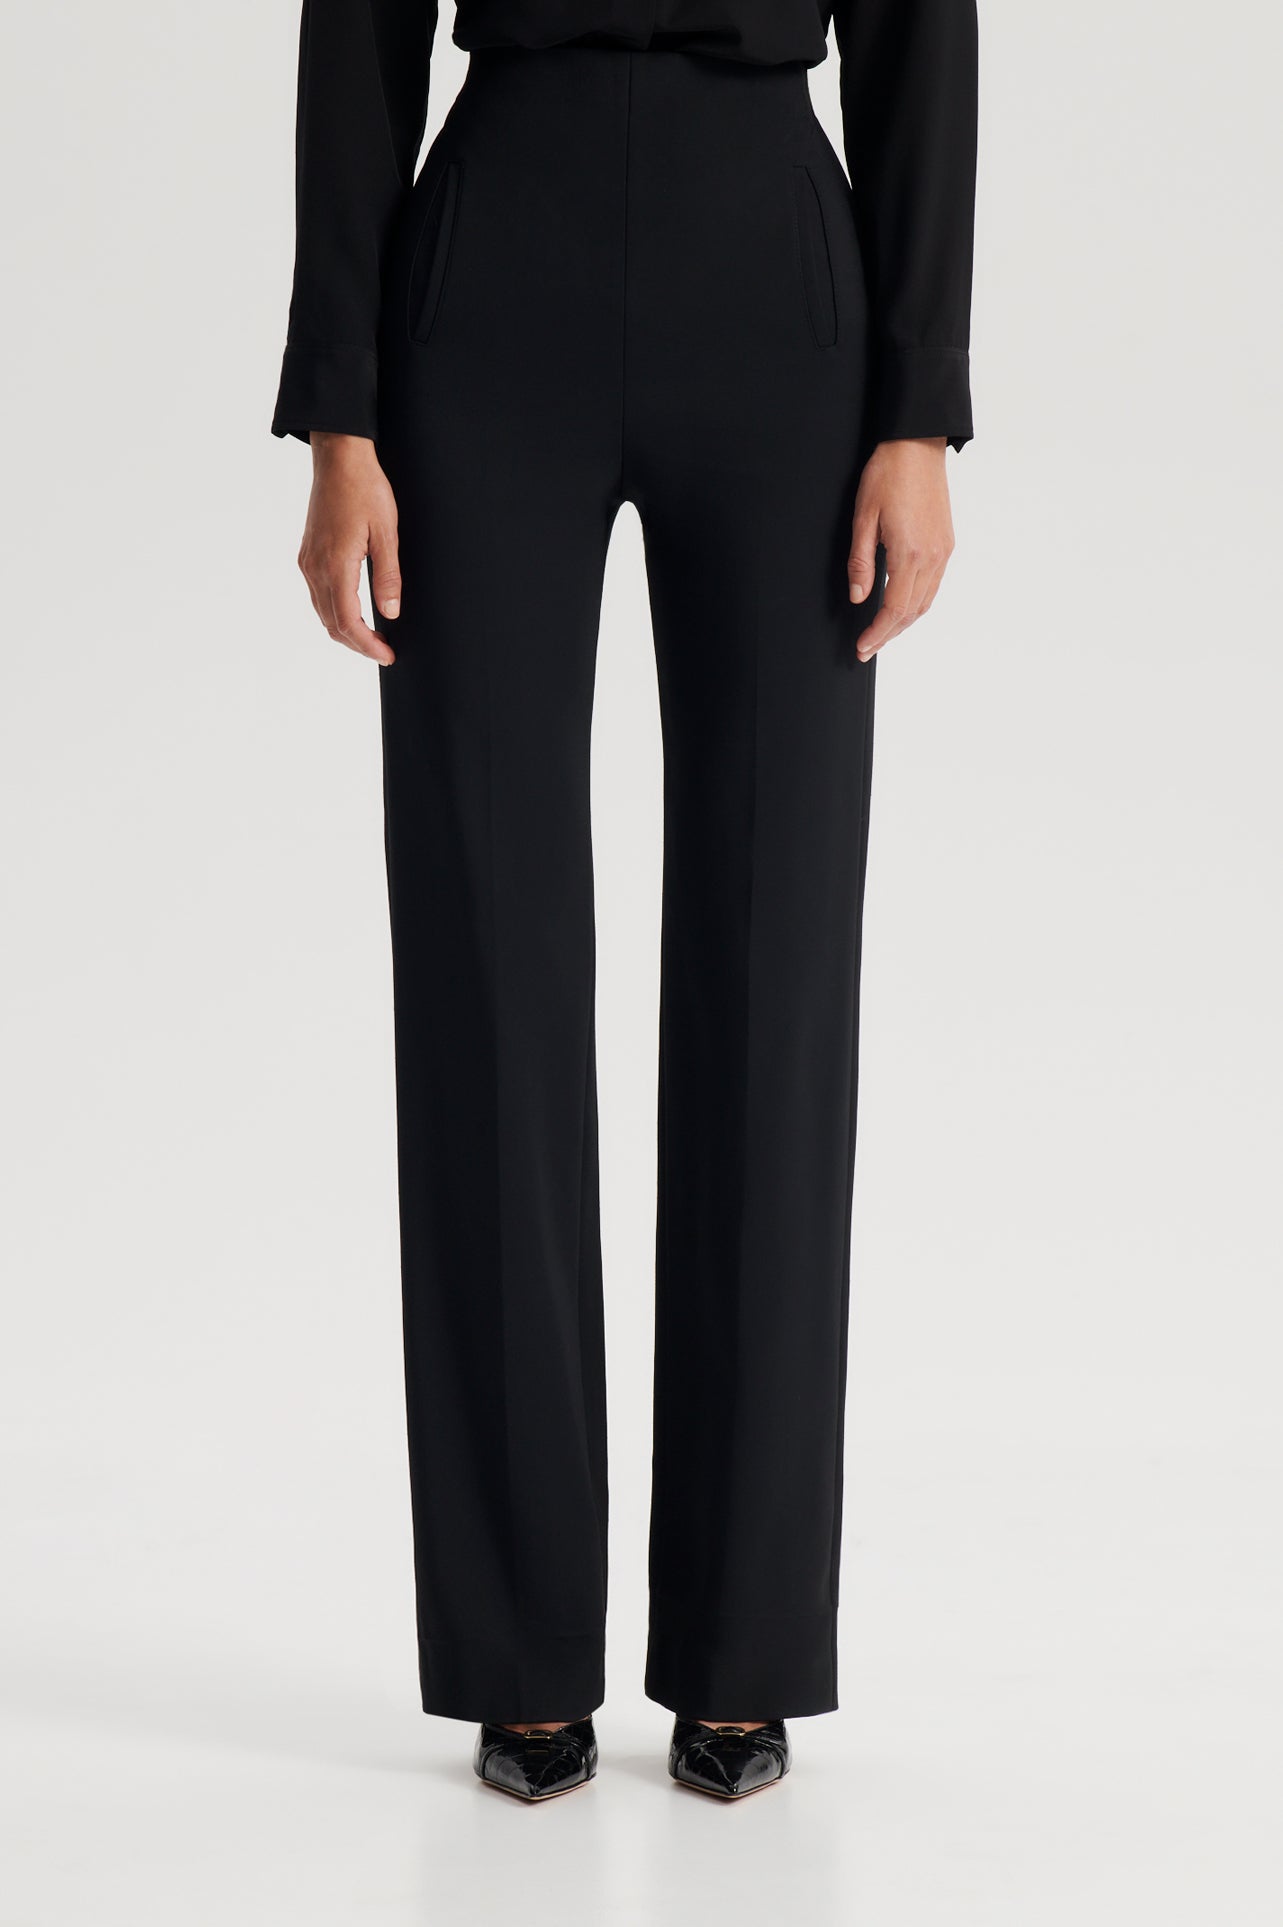 Strictly Business Black High Waisted Trouser Pants